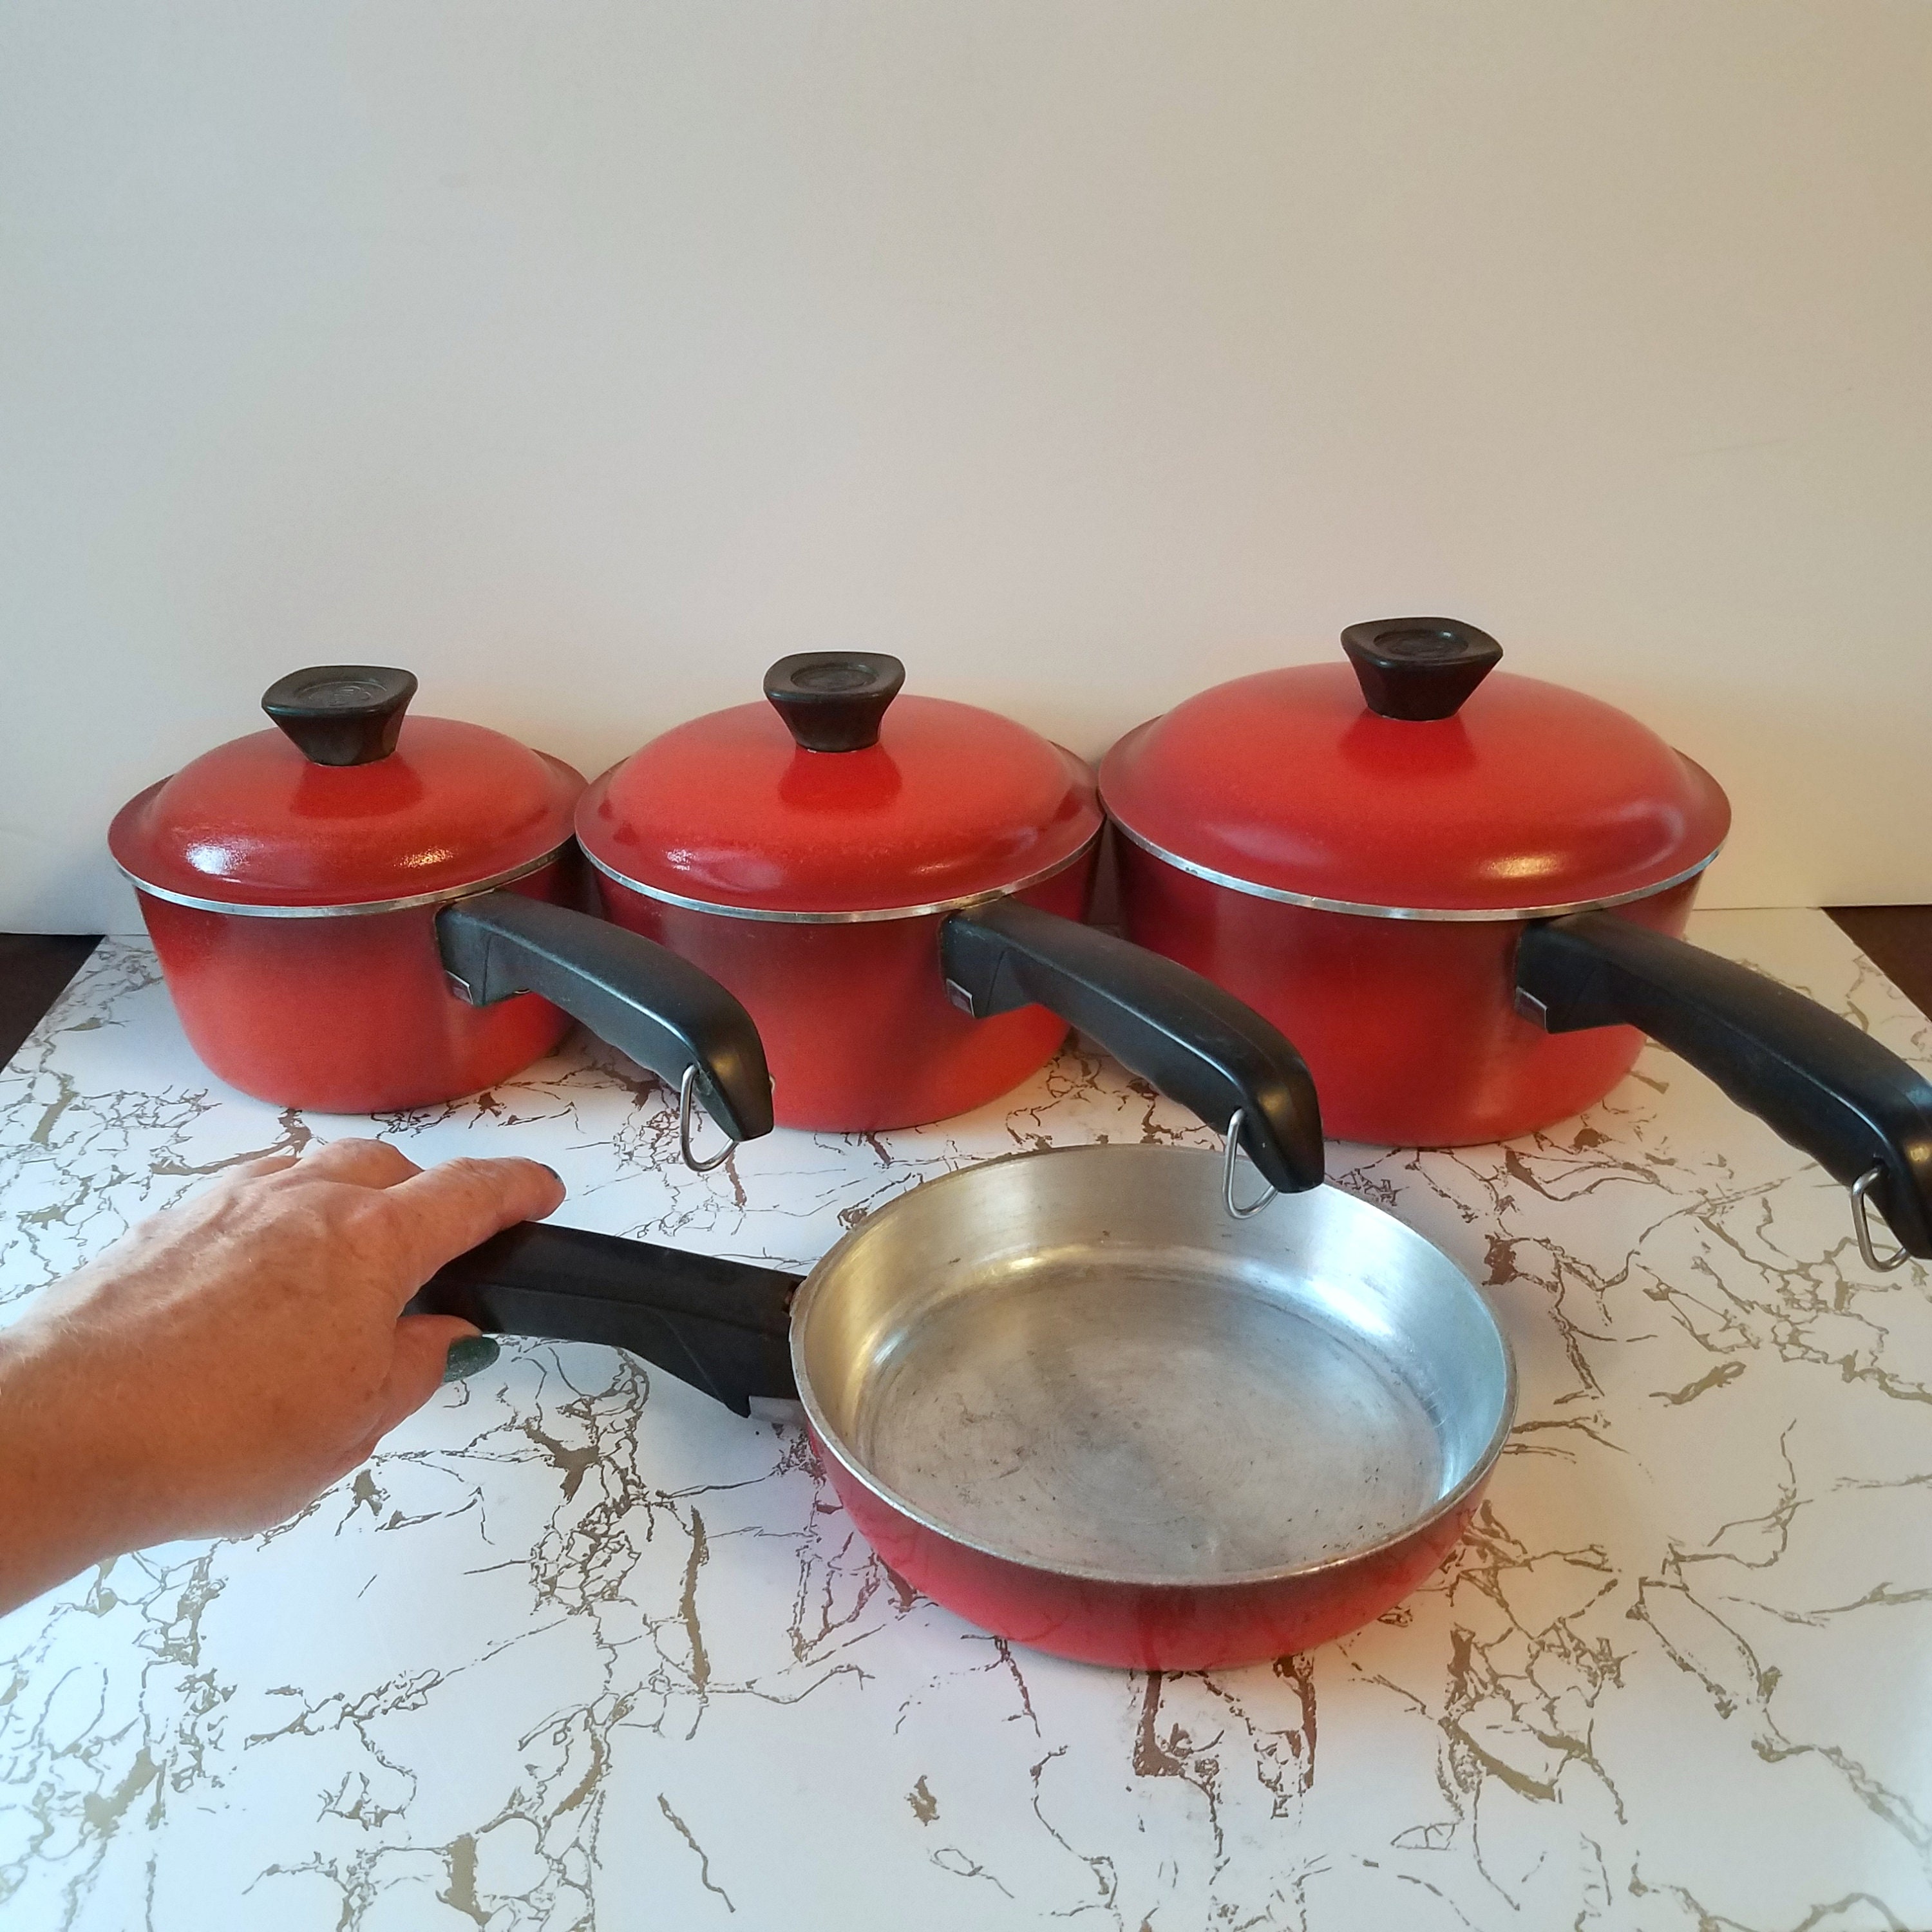 User-Friendly and Easy to Maintain club aluminium cookware sets